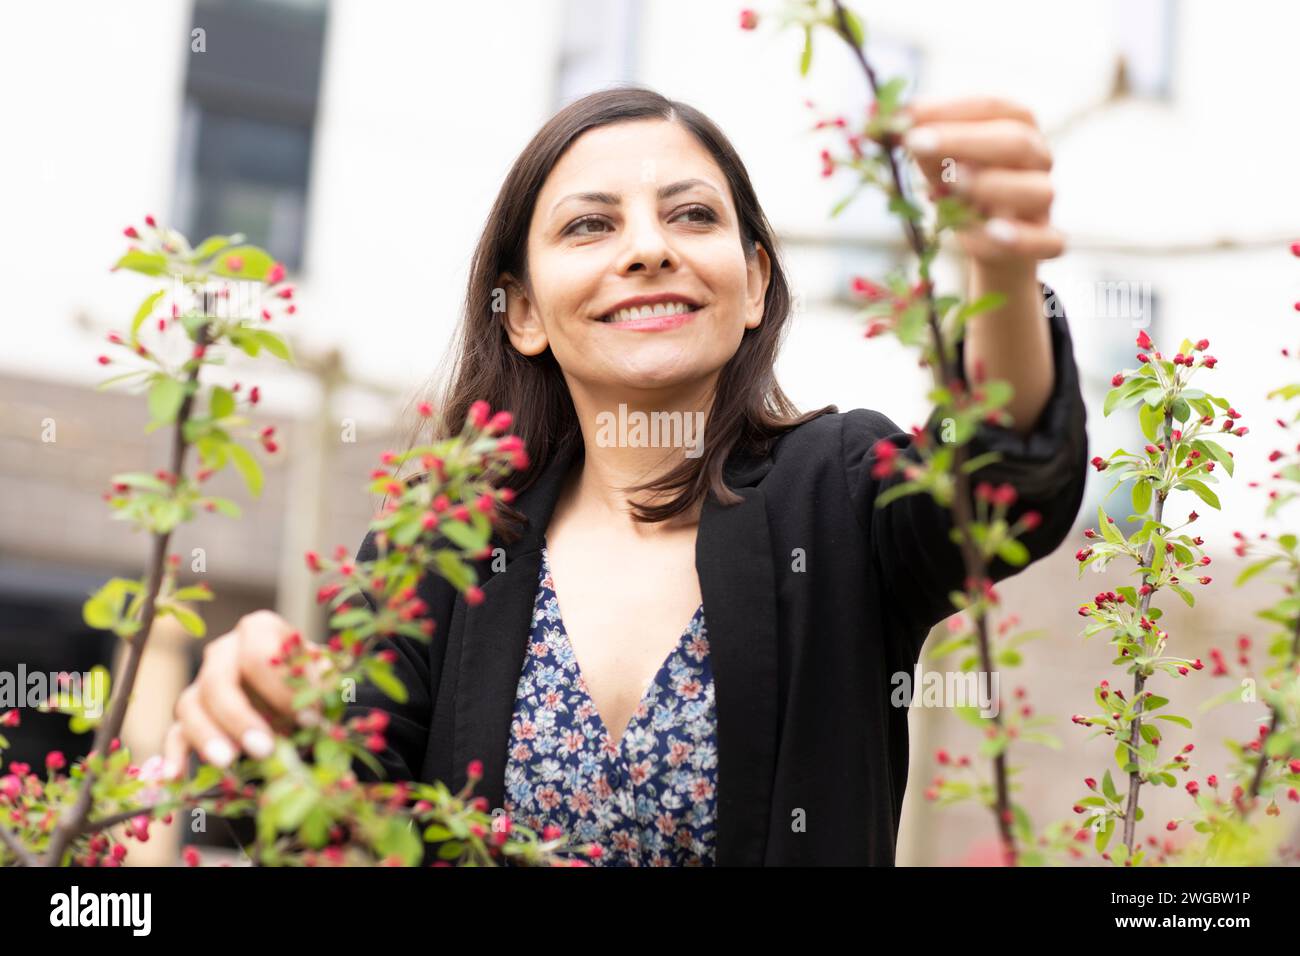 Smiling woman standing in her garden tending to her plants, Germany Stock Photo